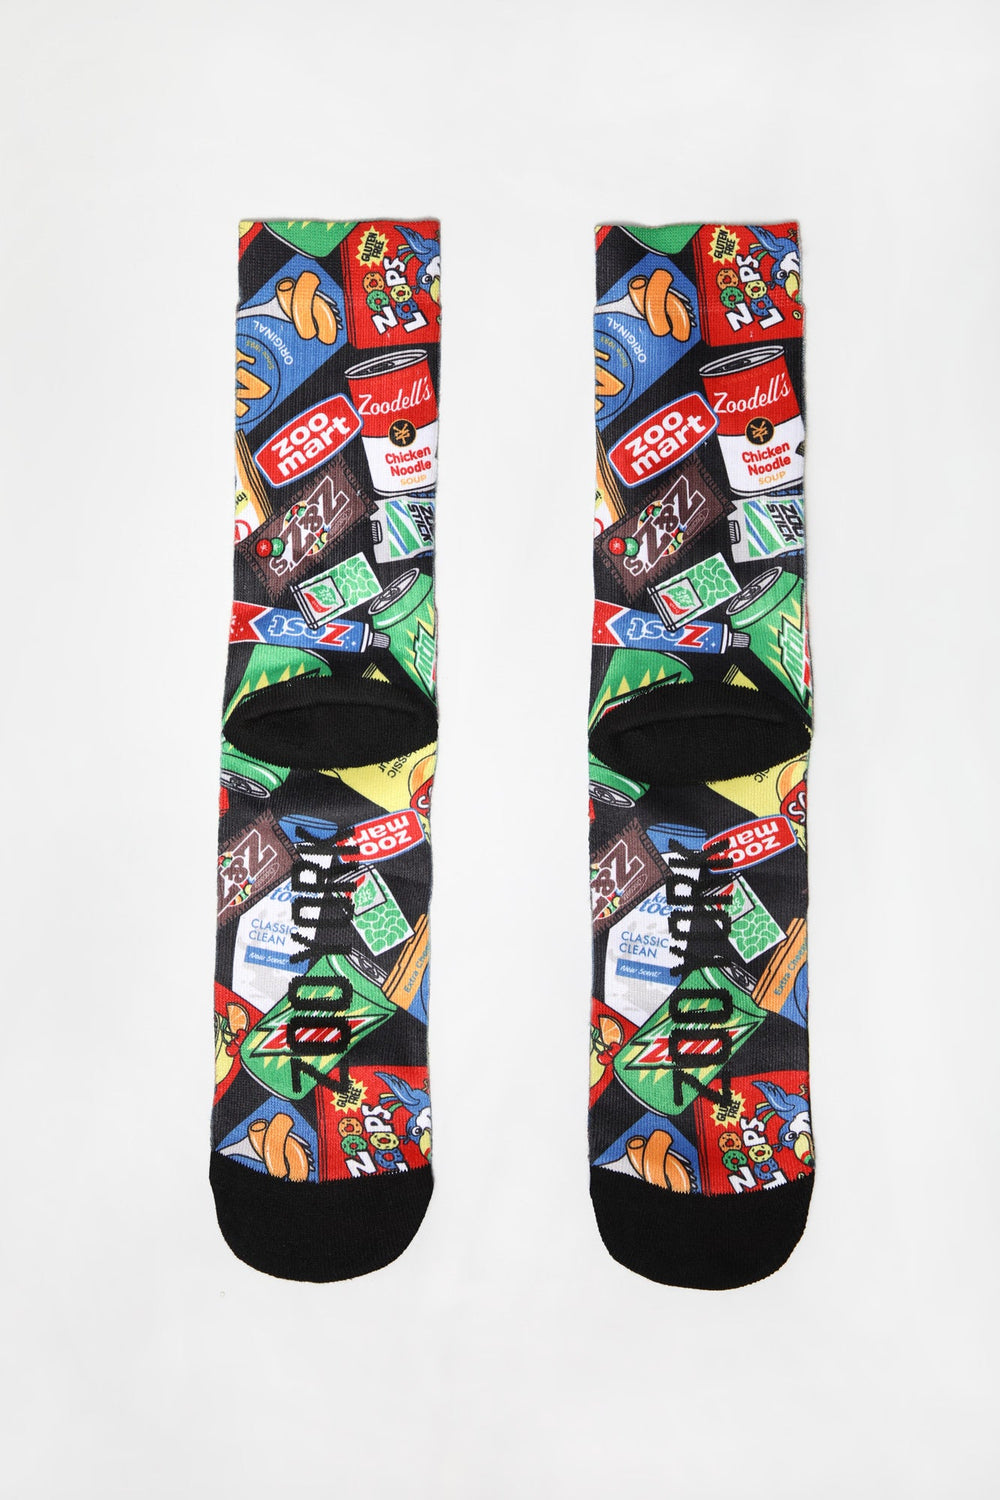 Chaussettes Zoomart Zoo York Homme Chaussettes Zoomart Zoo York Homme